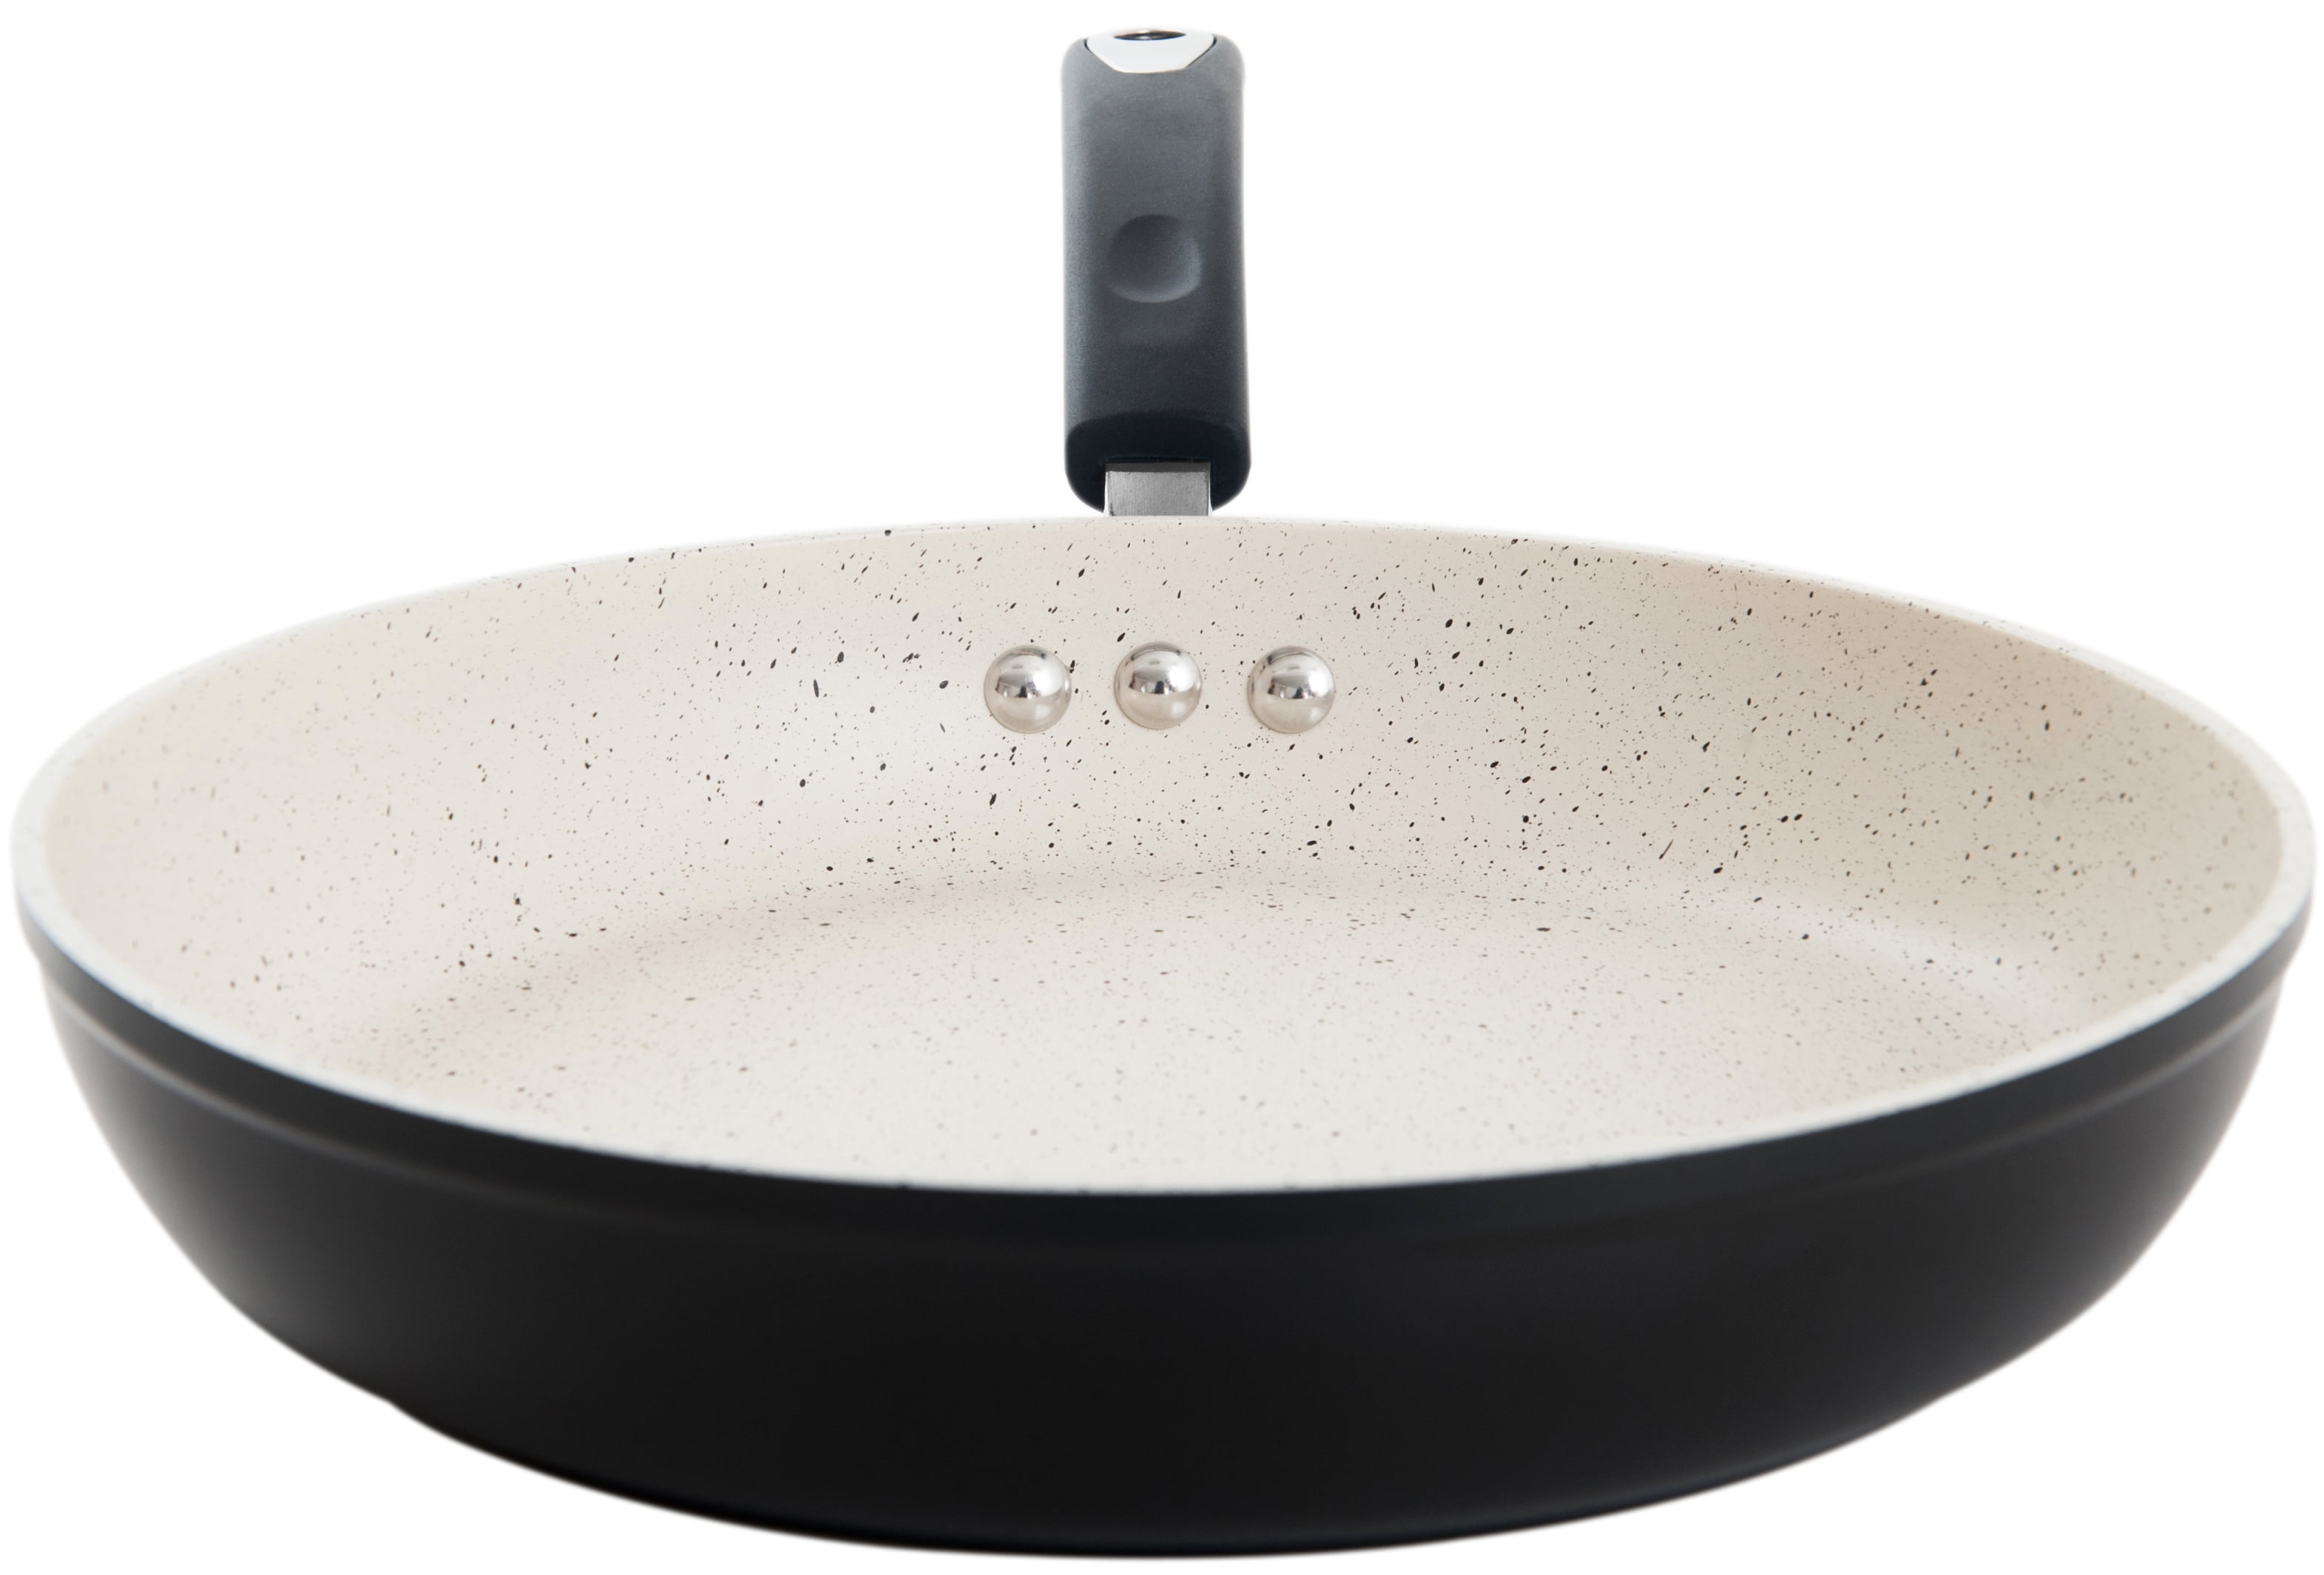 This Is the Best Omelette Pan on : Ozeri Stone Frying Pan